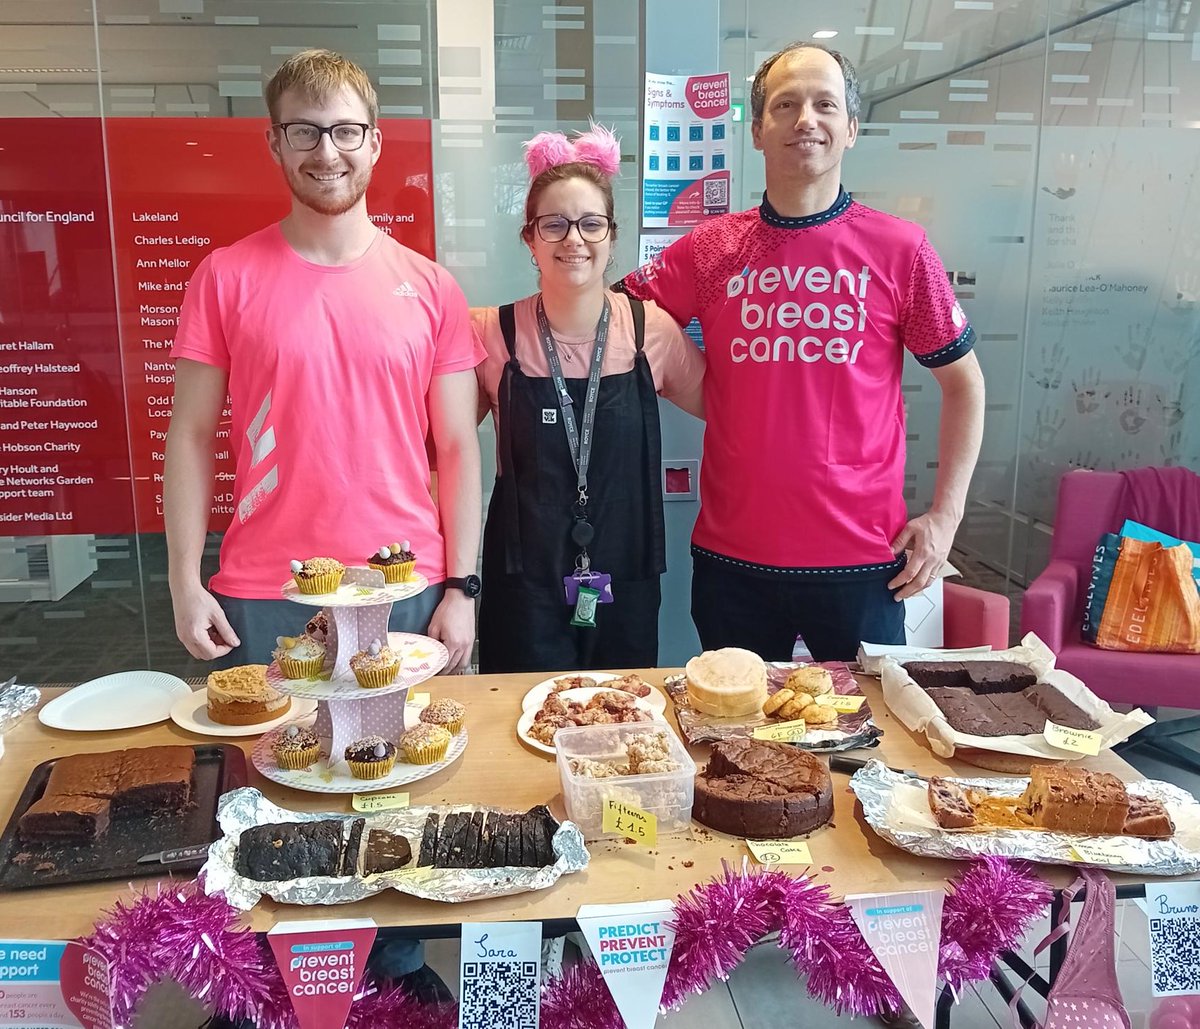 Ryan, Sara and Bruno from our breast biology group are all lacing up their running shoes and fundraising for @wearepreventBC on the Great Manchester Run. Show your support by purchasing one of our delicious cakes! Today @ the OCRB now until sold out! @MCRCnews @UoM_DCS @CRUK_MI